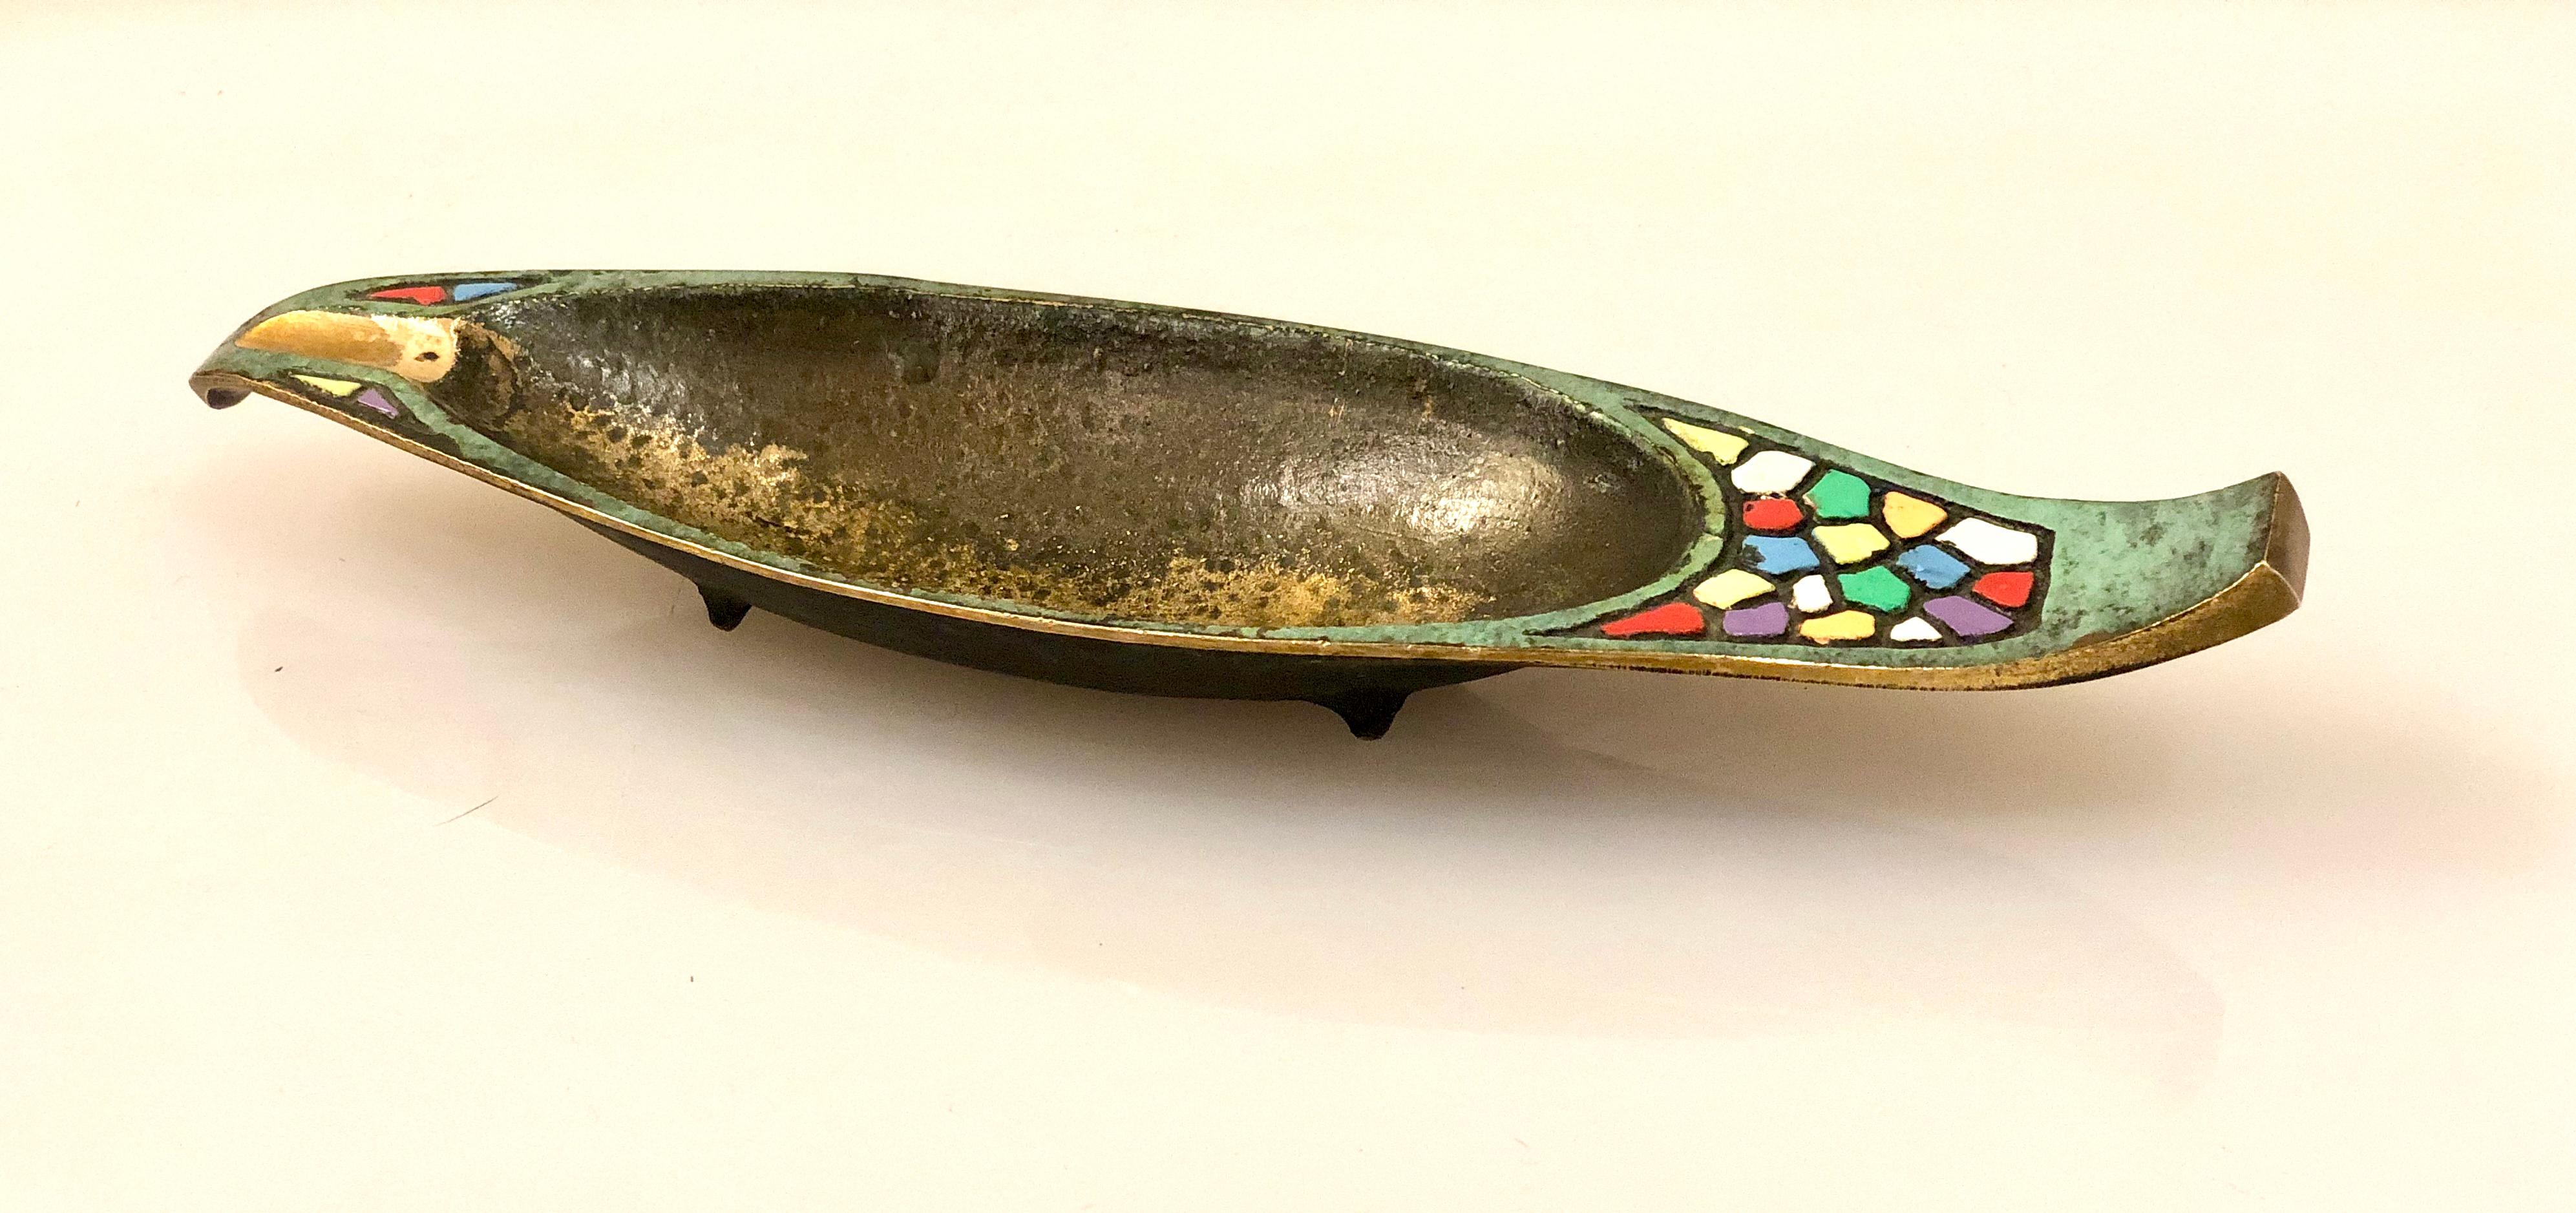 Multicolored solid brass Atomic design, ashtray circa 1950s Made in Israel. Enameled multicolor and black combo.